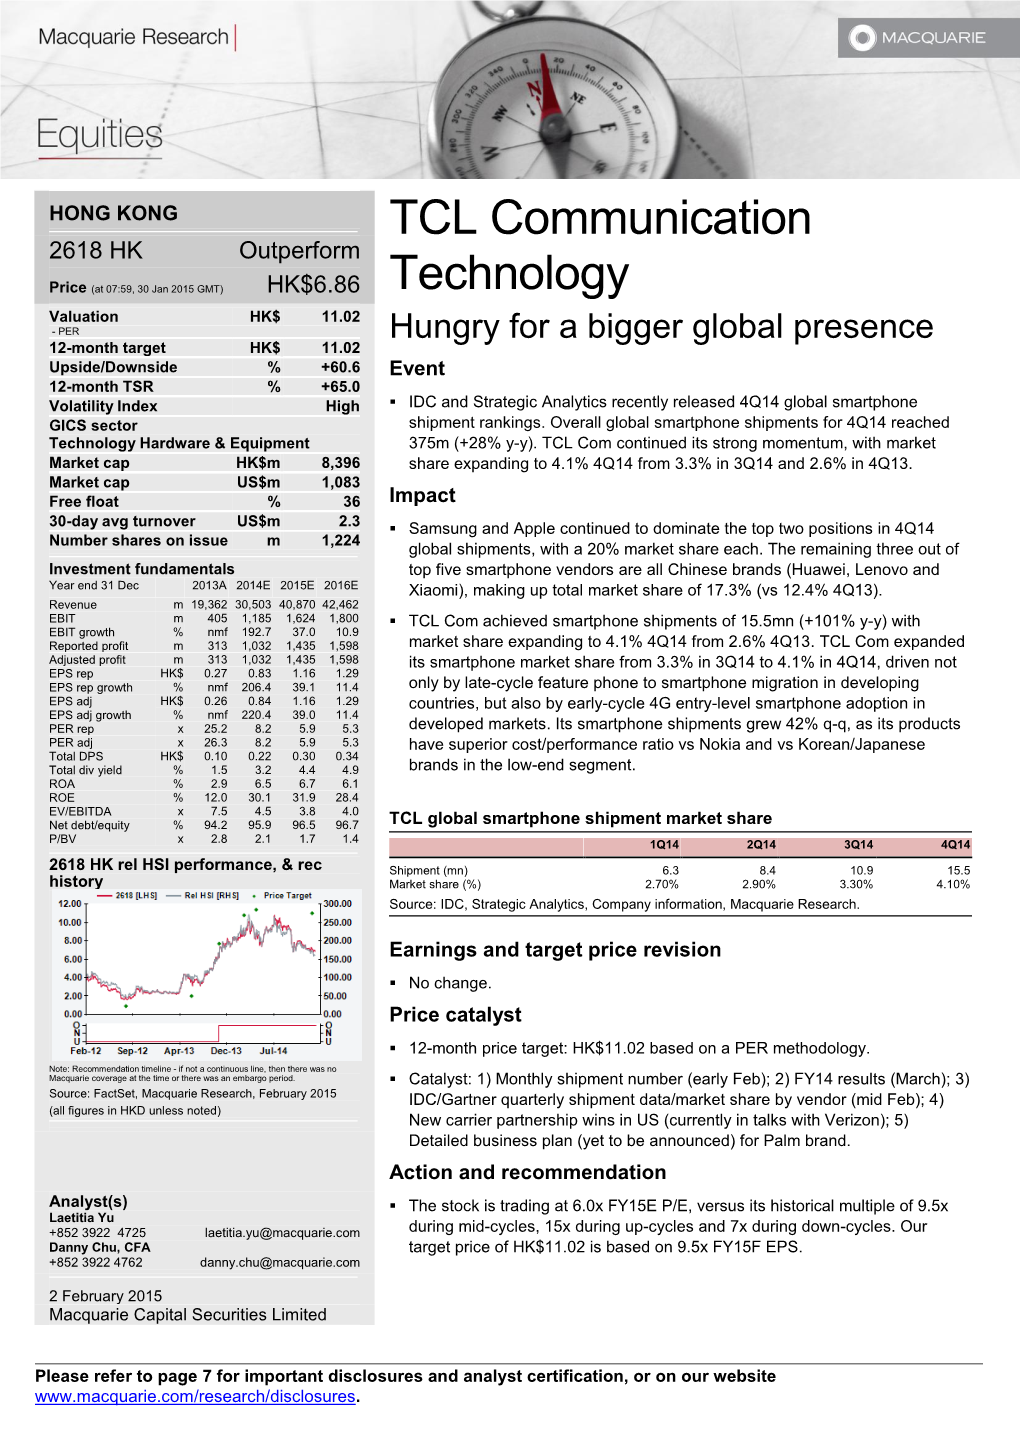 TCL Communication Technology Holdings Limited